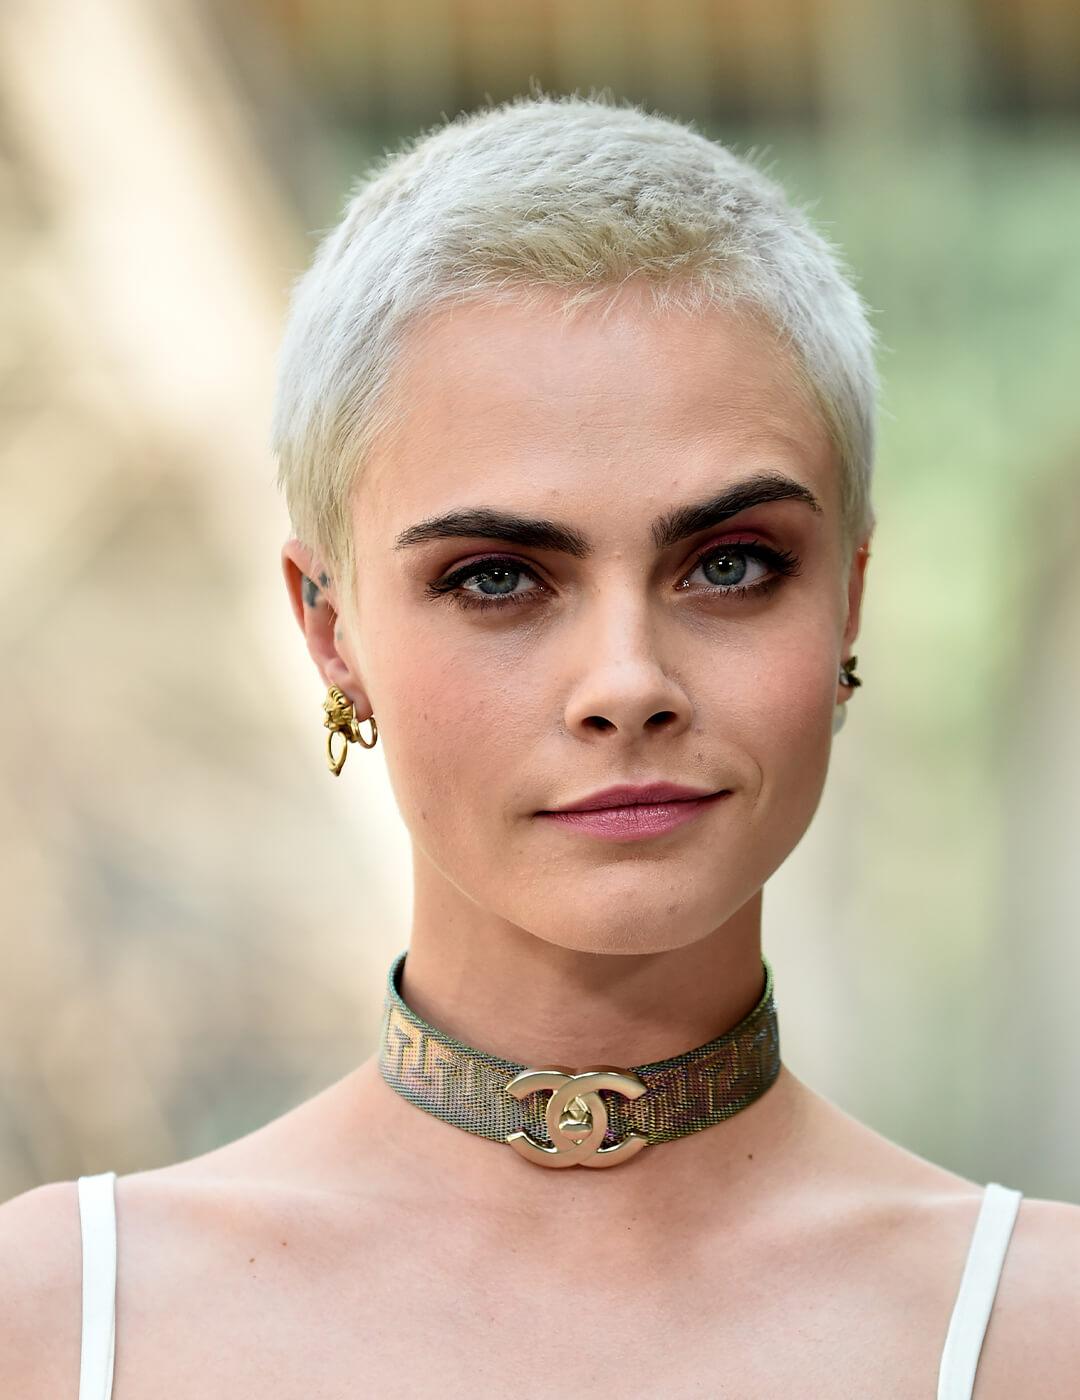 A photo of Cara Delevingne with bleached short cut wearing a white tank top and a Chanel choker